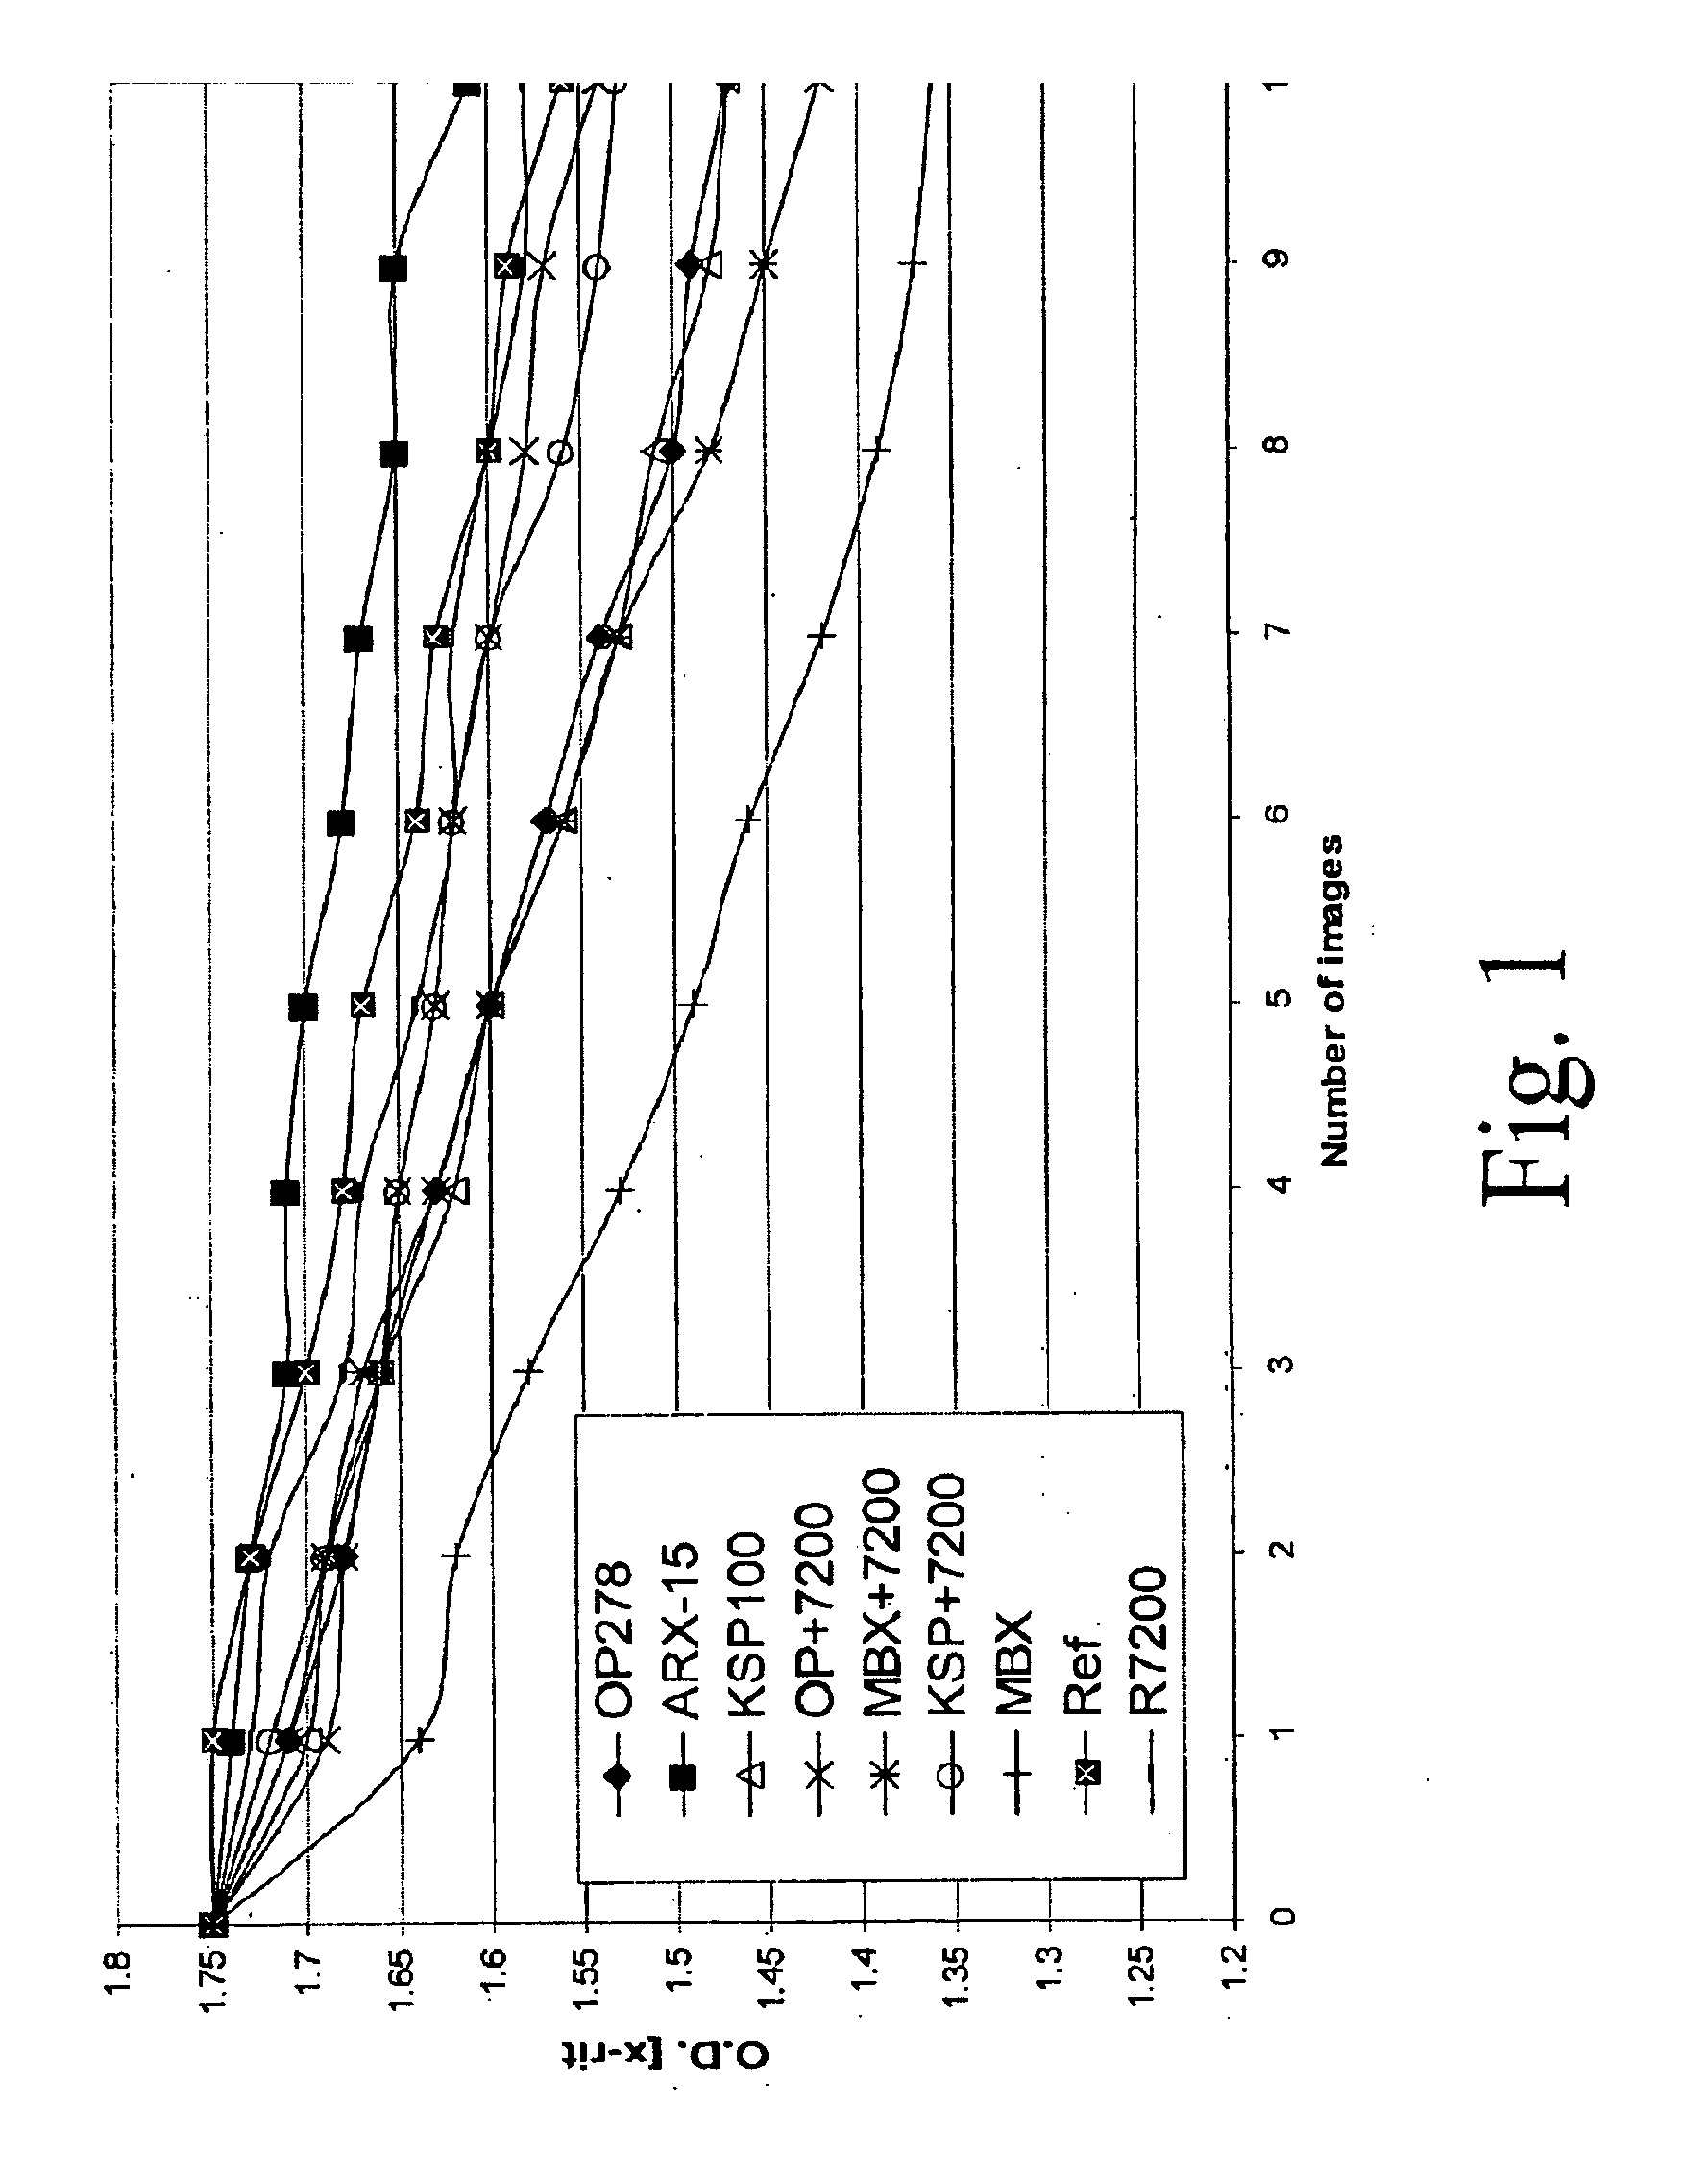 Toner compositions for decreasing background development in liquid electrostatic printing and methods for making and using same